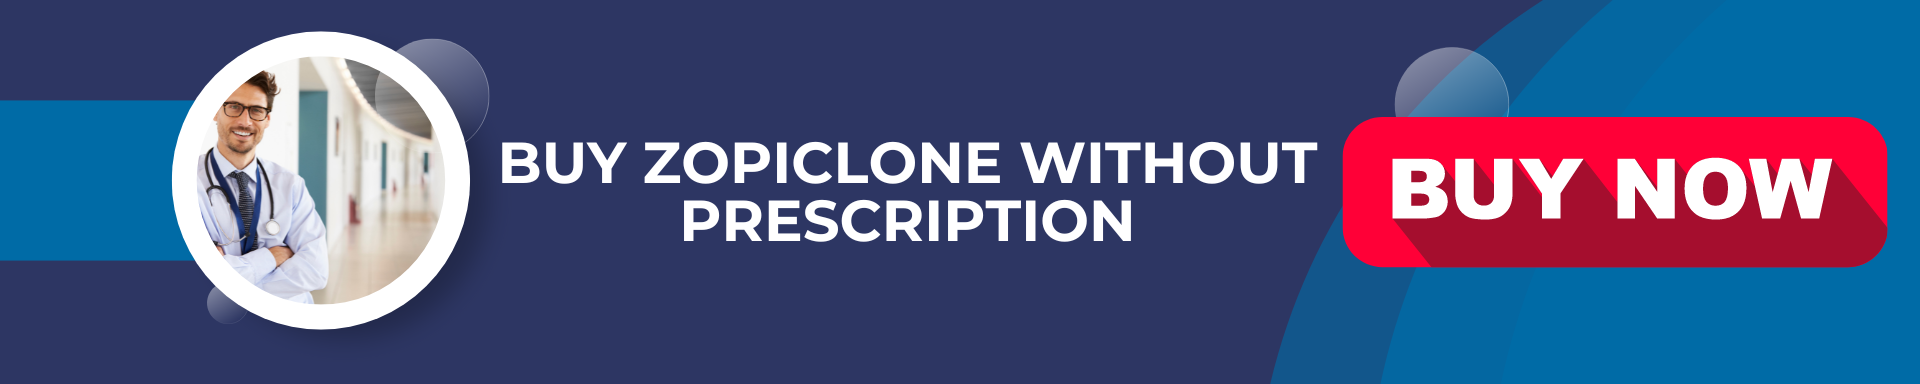 Buy Zopiclone over the counter